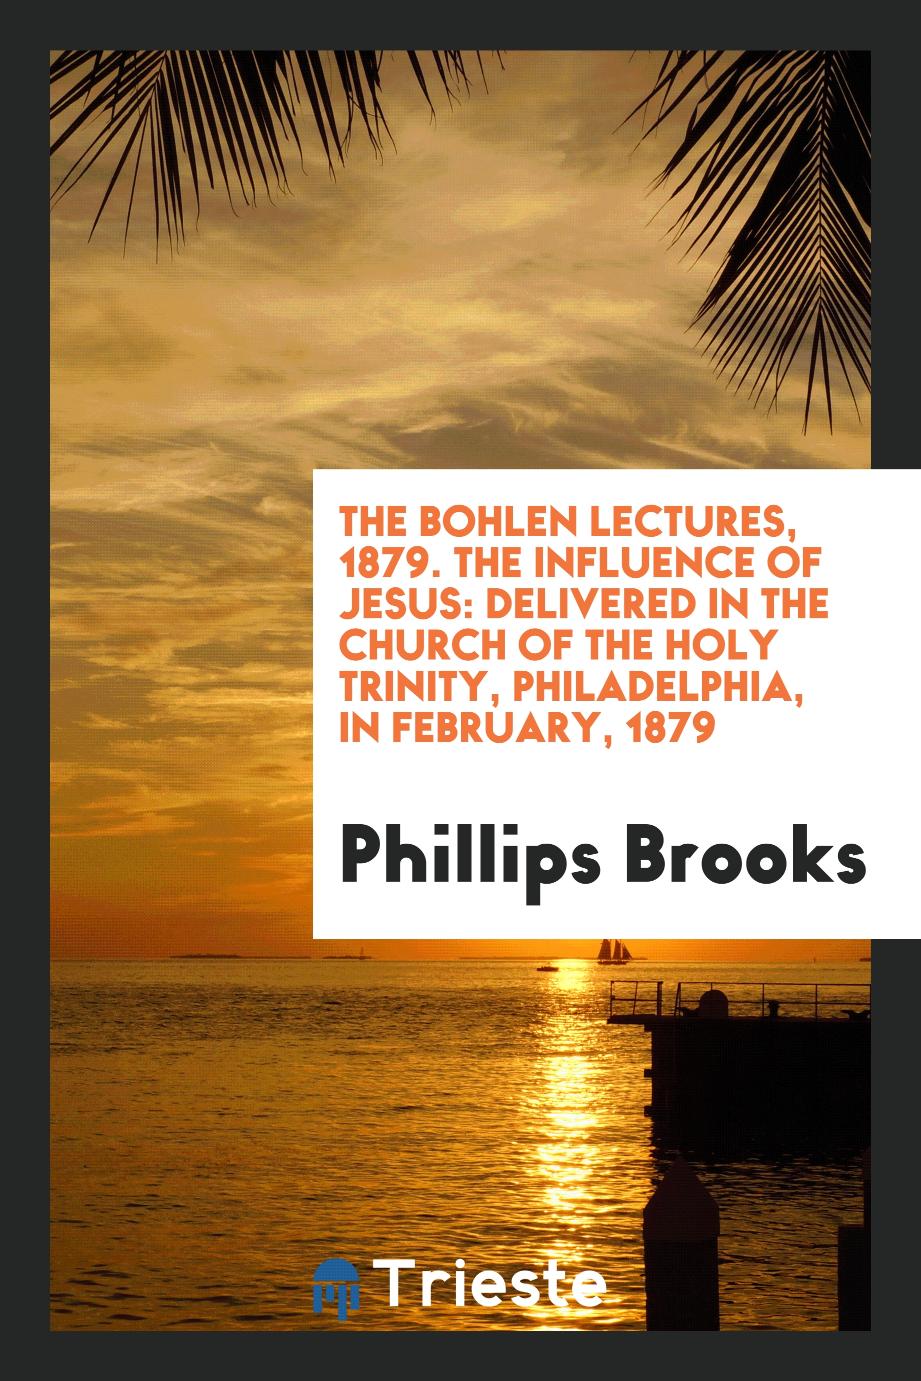 The Bohlen Lectures, 1879. The Influence of Jesus: Delivered in the Church of the Holy Trinity, Philadelphia, in February, 1879